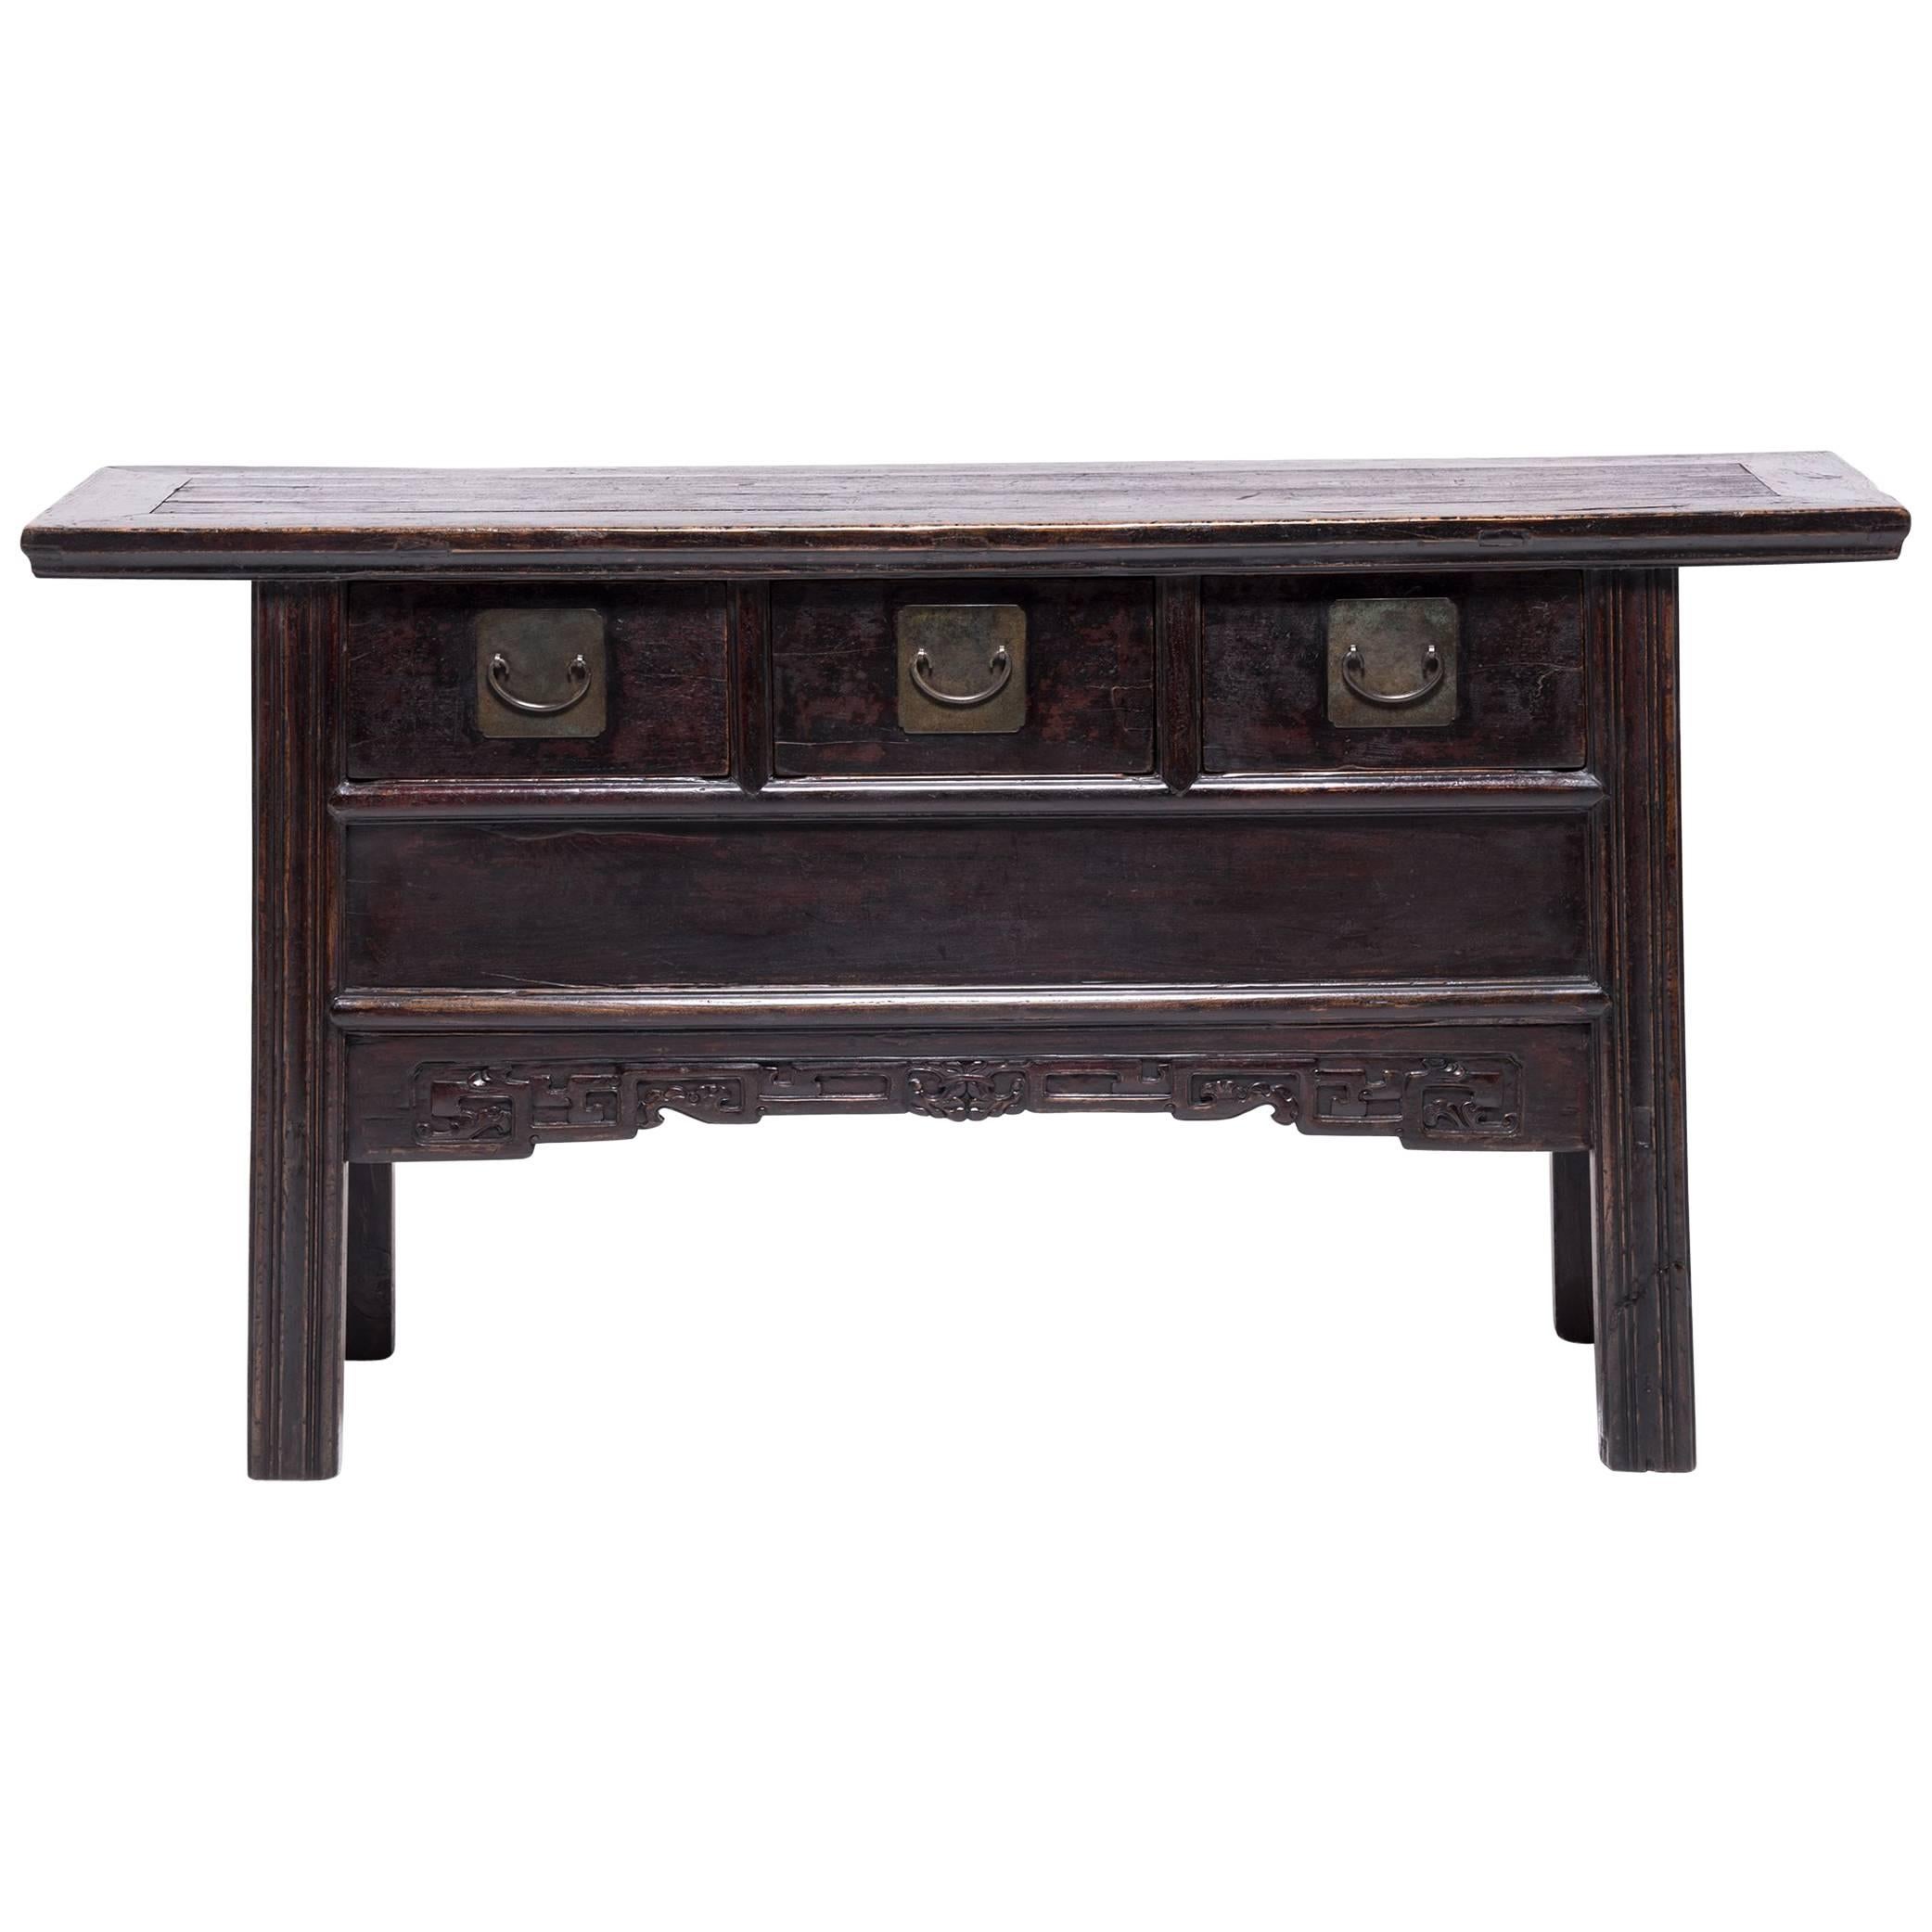 Chinese Stepped Dragon Altar Sideboard